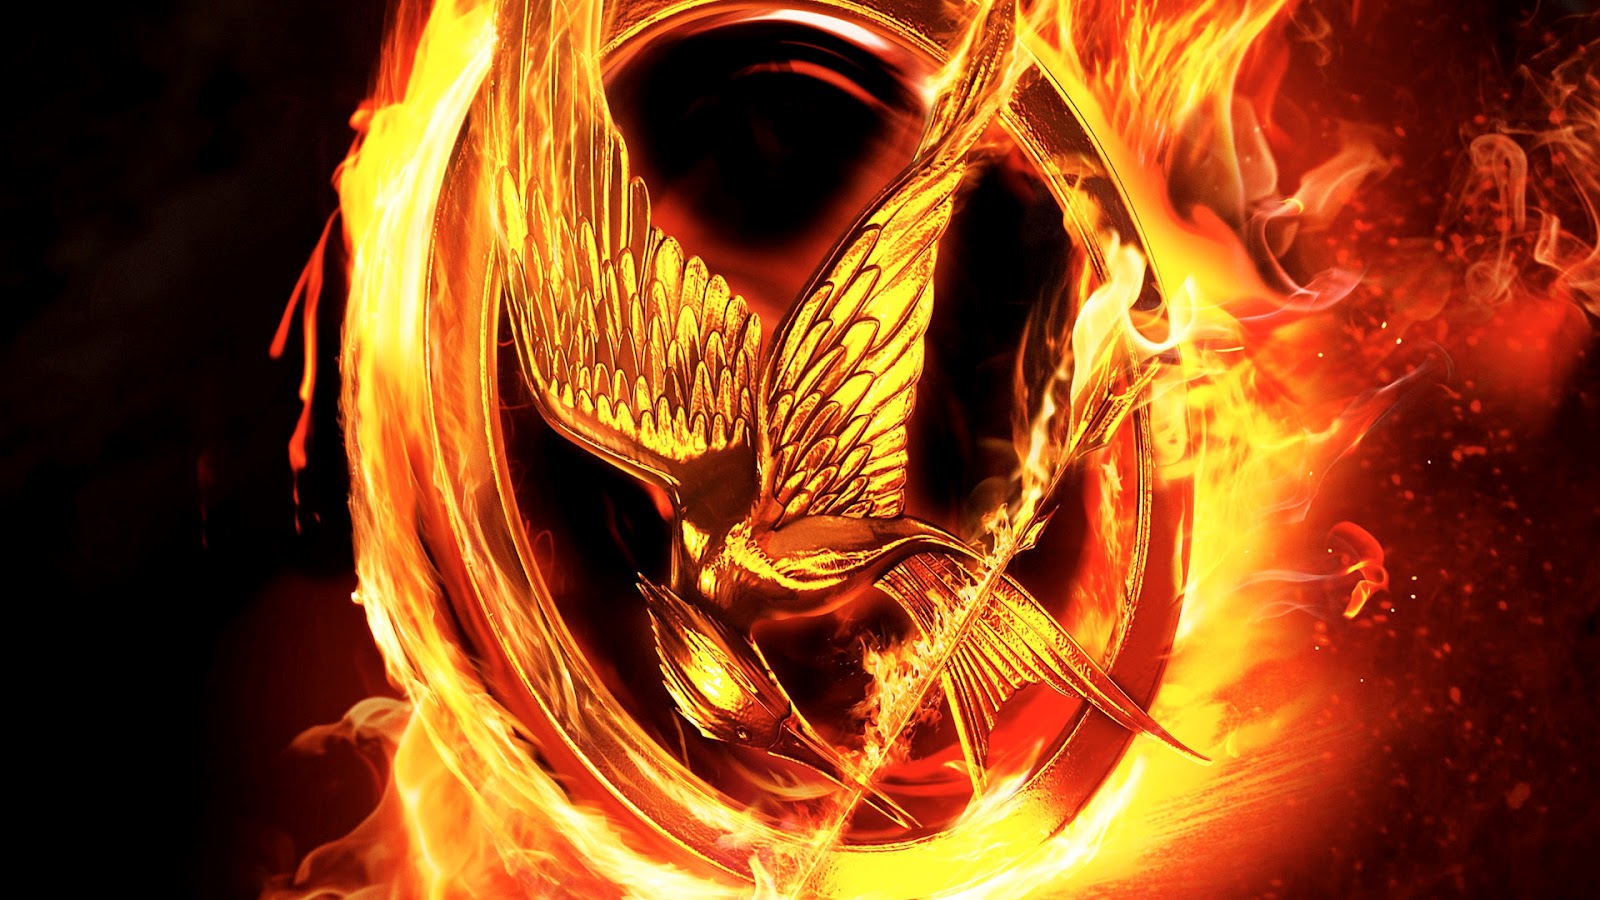 The Hunger Games Wallpaper Games PC Downloads 1600x900